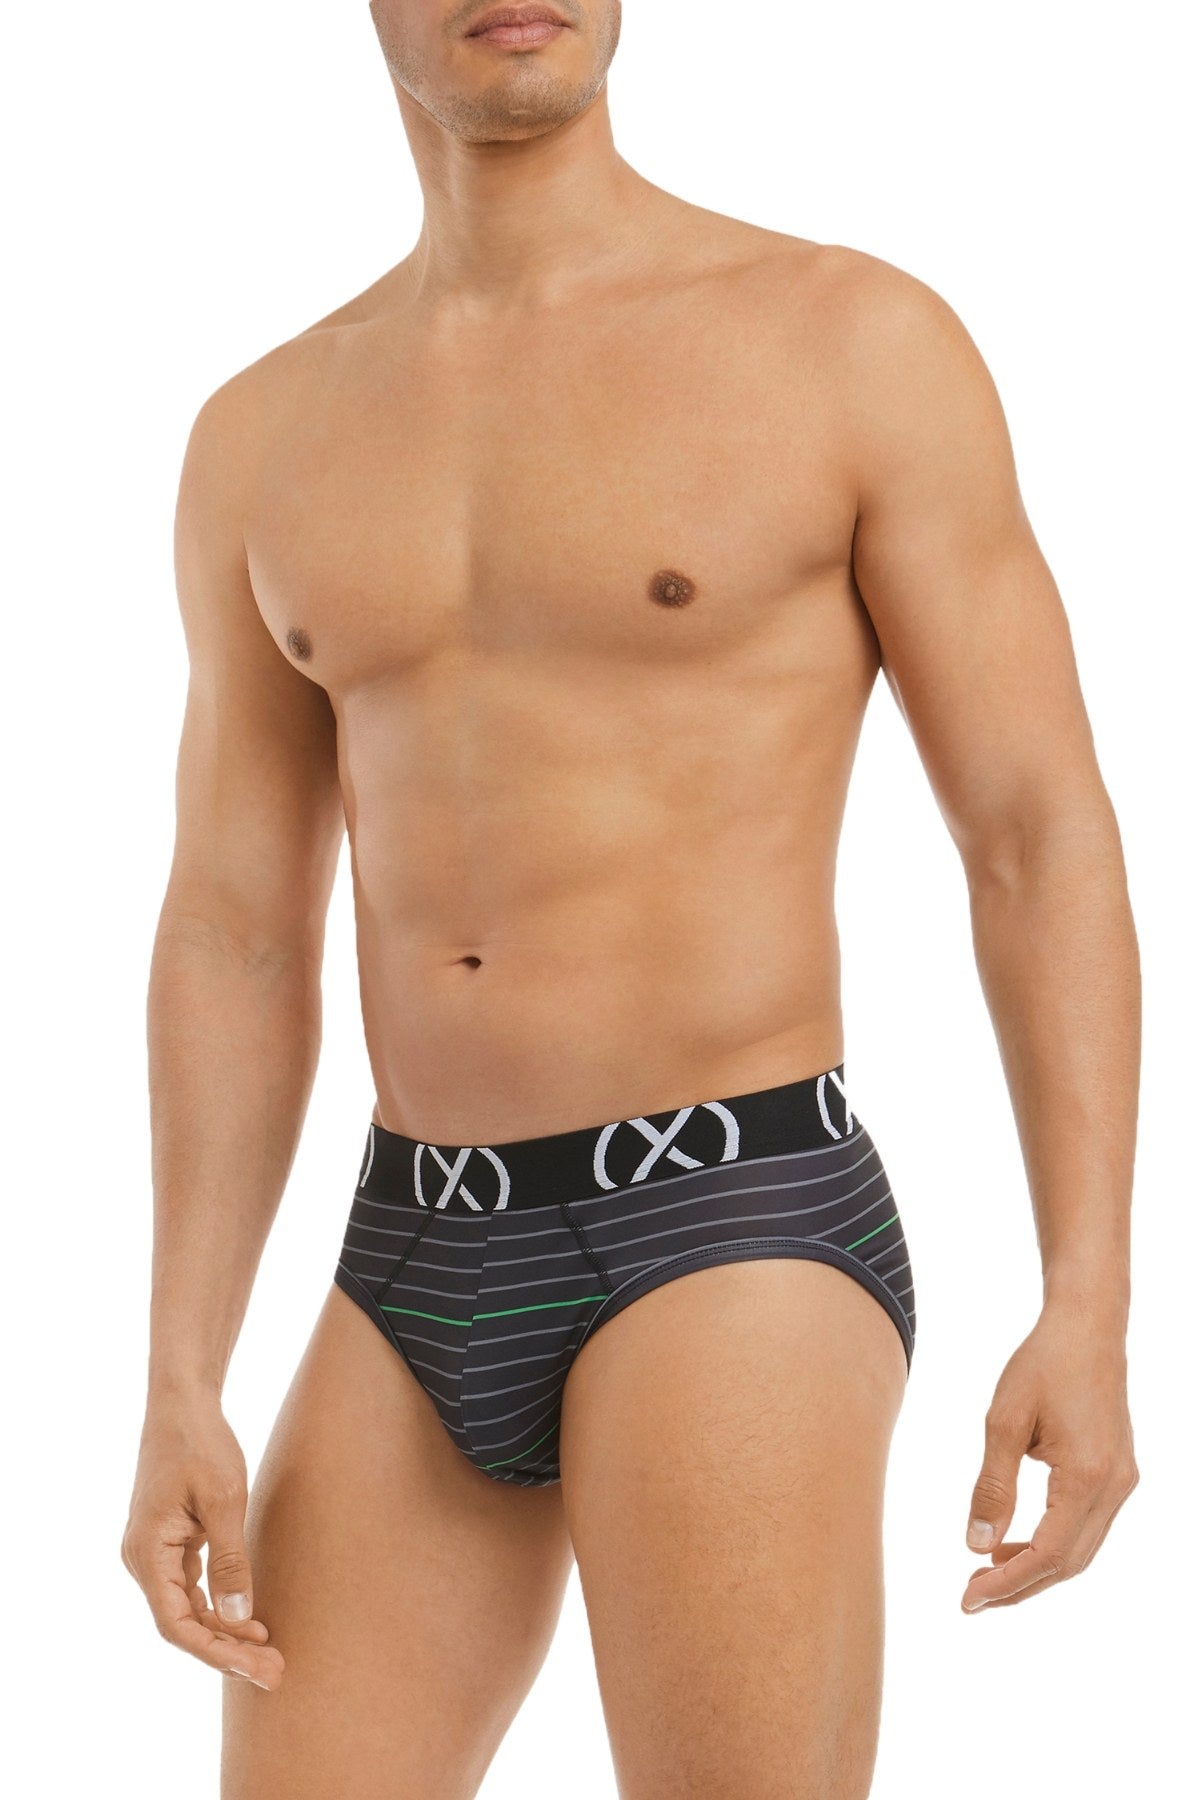 (X) Fieryred Varsity Navy and Stripe No Show Briefs 3-Pack